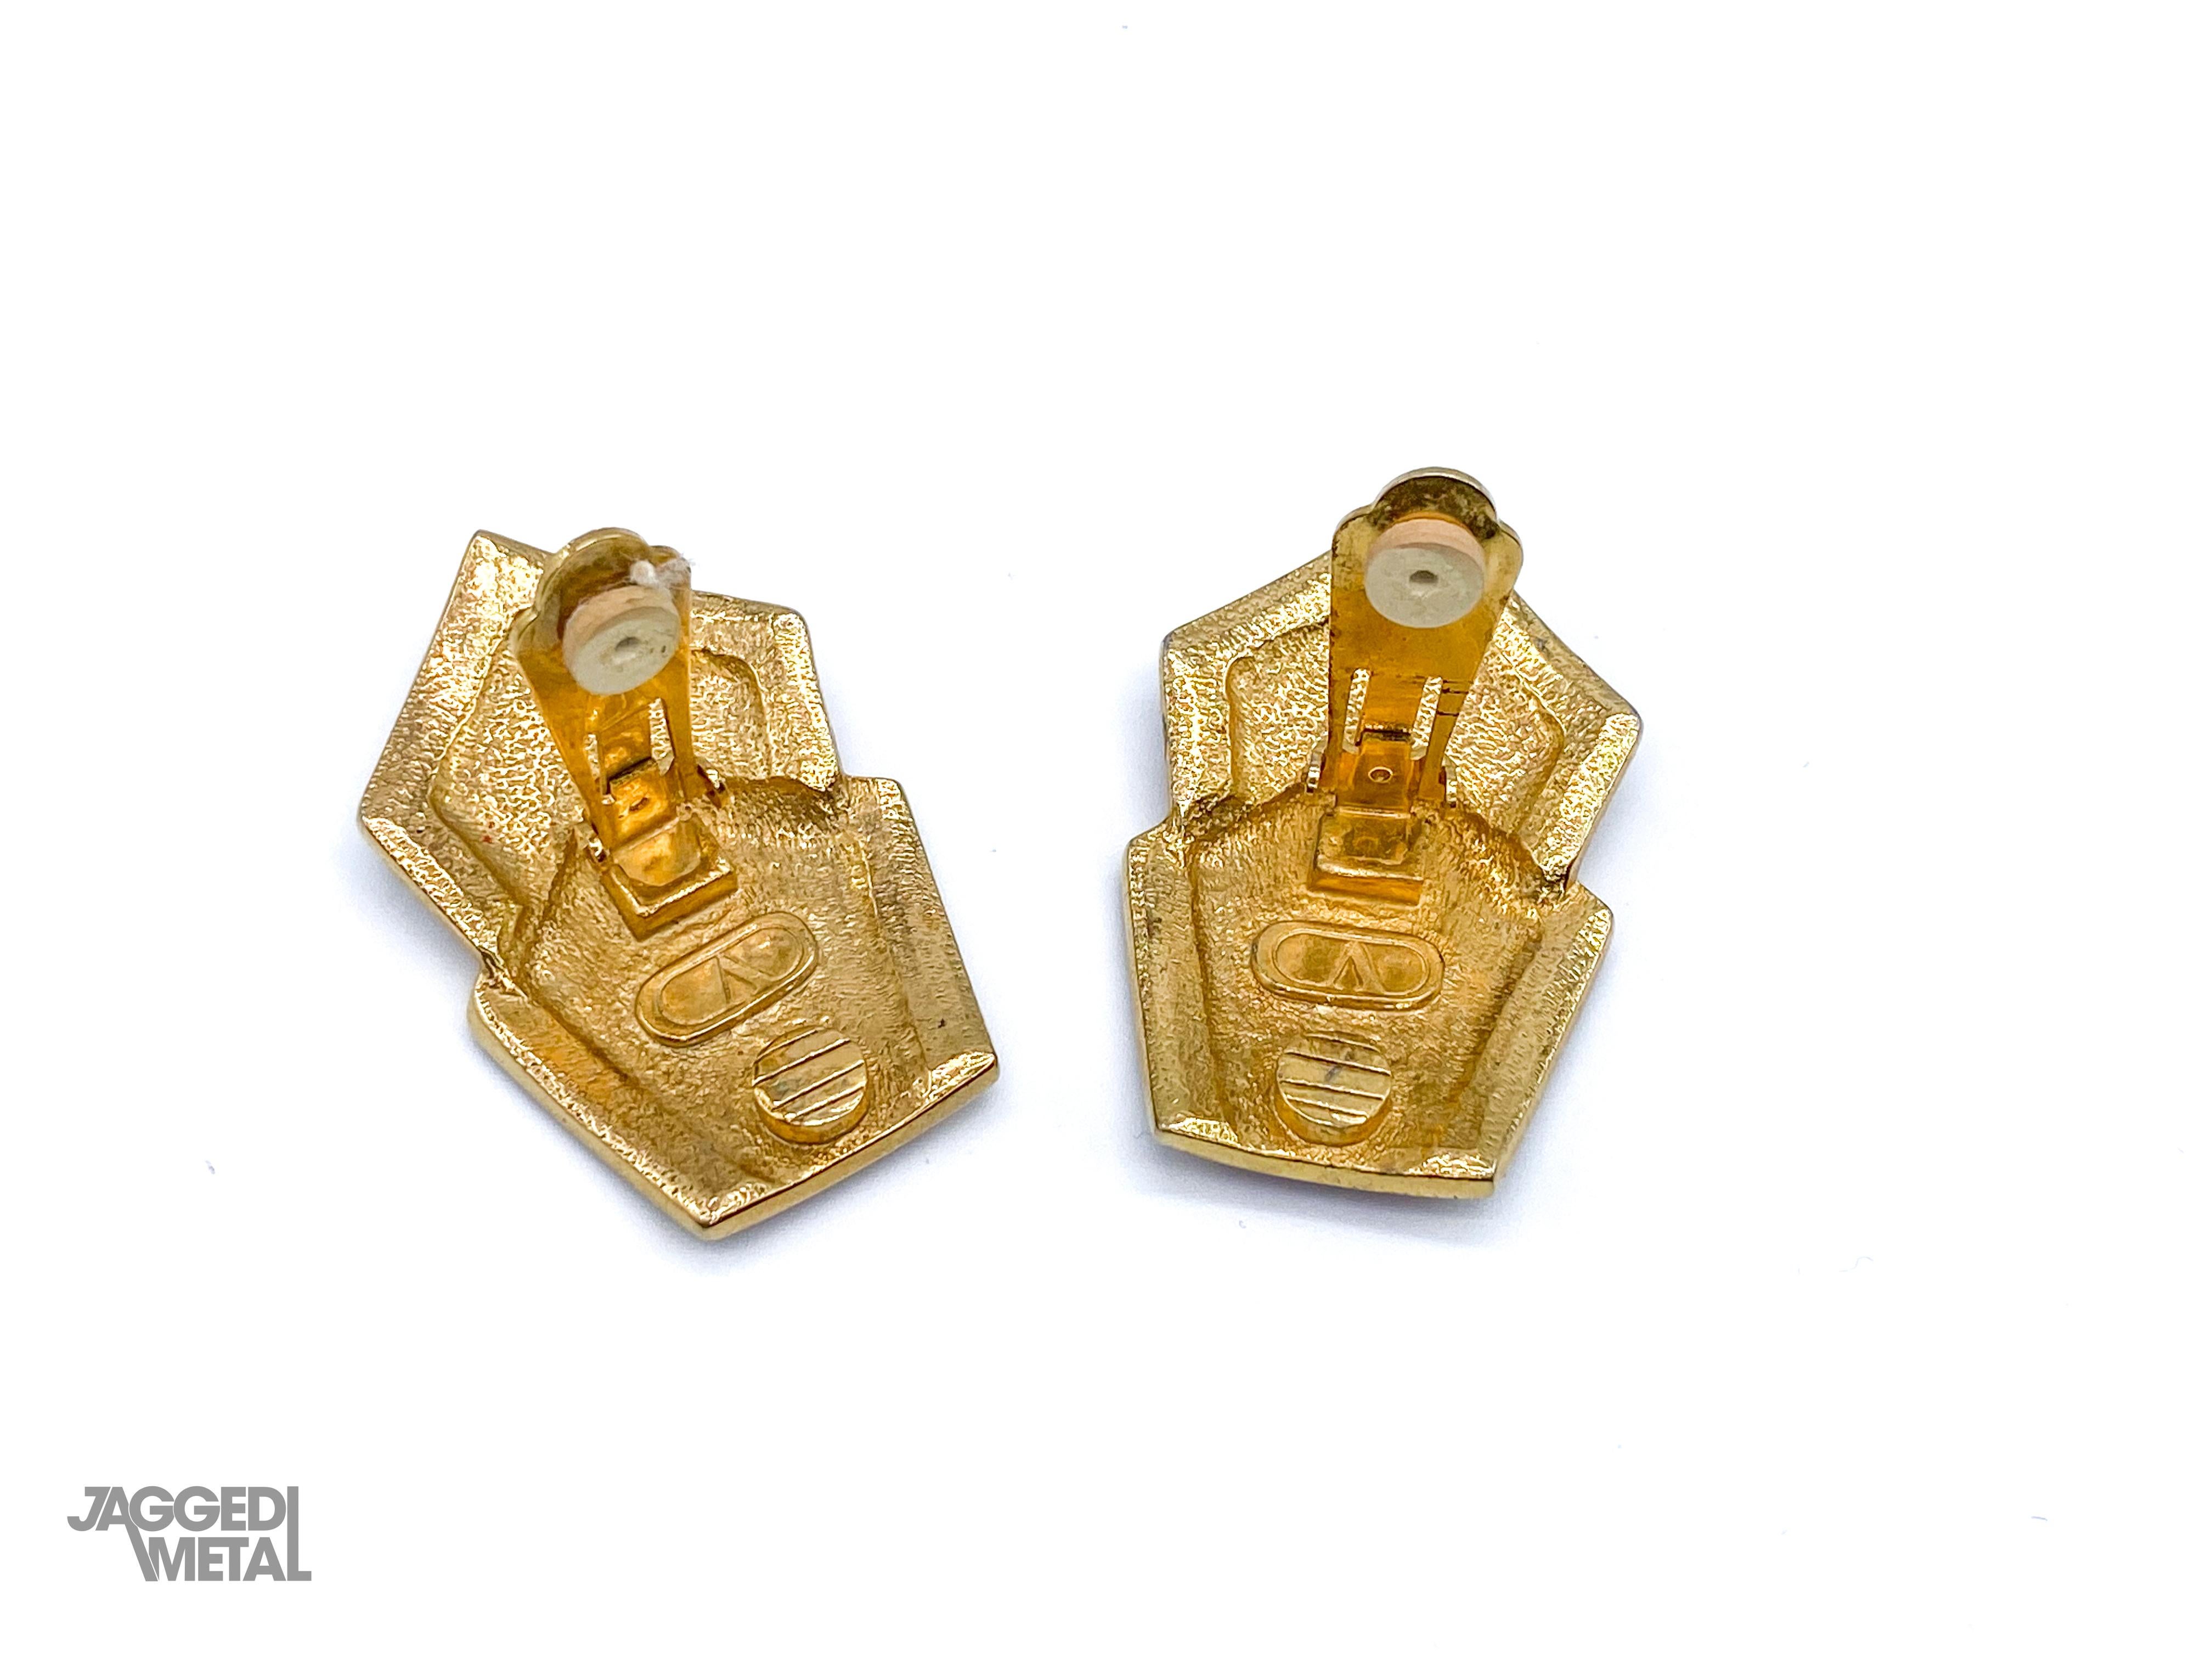 Valentino 1980s Vintage Clip On Earrings

Beautiful statement art deco inspired earrings from the 1980s Valentino archive.  

Detail
-Made in Italy in the early-mid 1980s
-Gold plated metal 
-Double chevron design inlaid with Valentino's signature